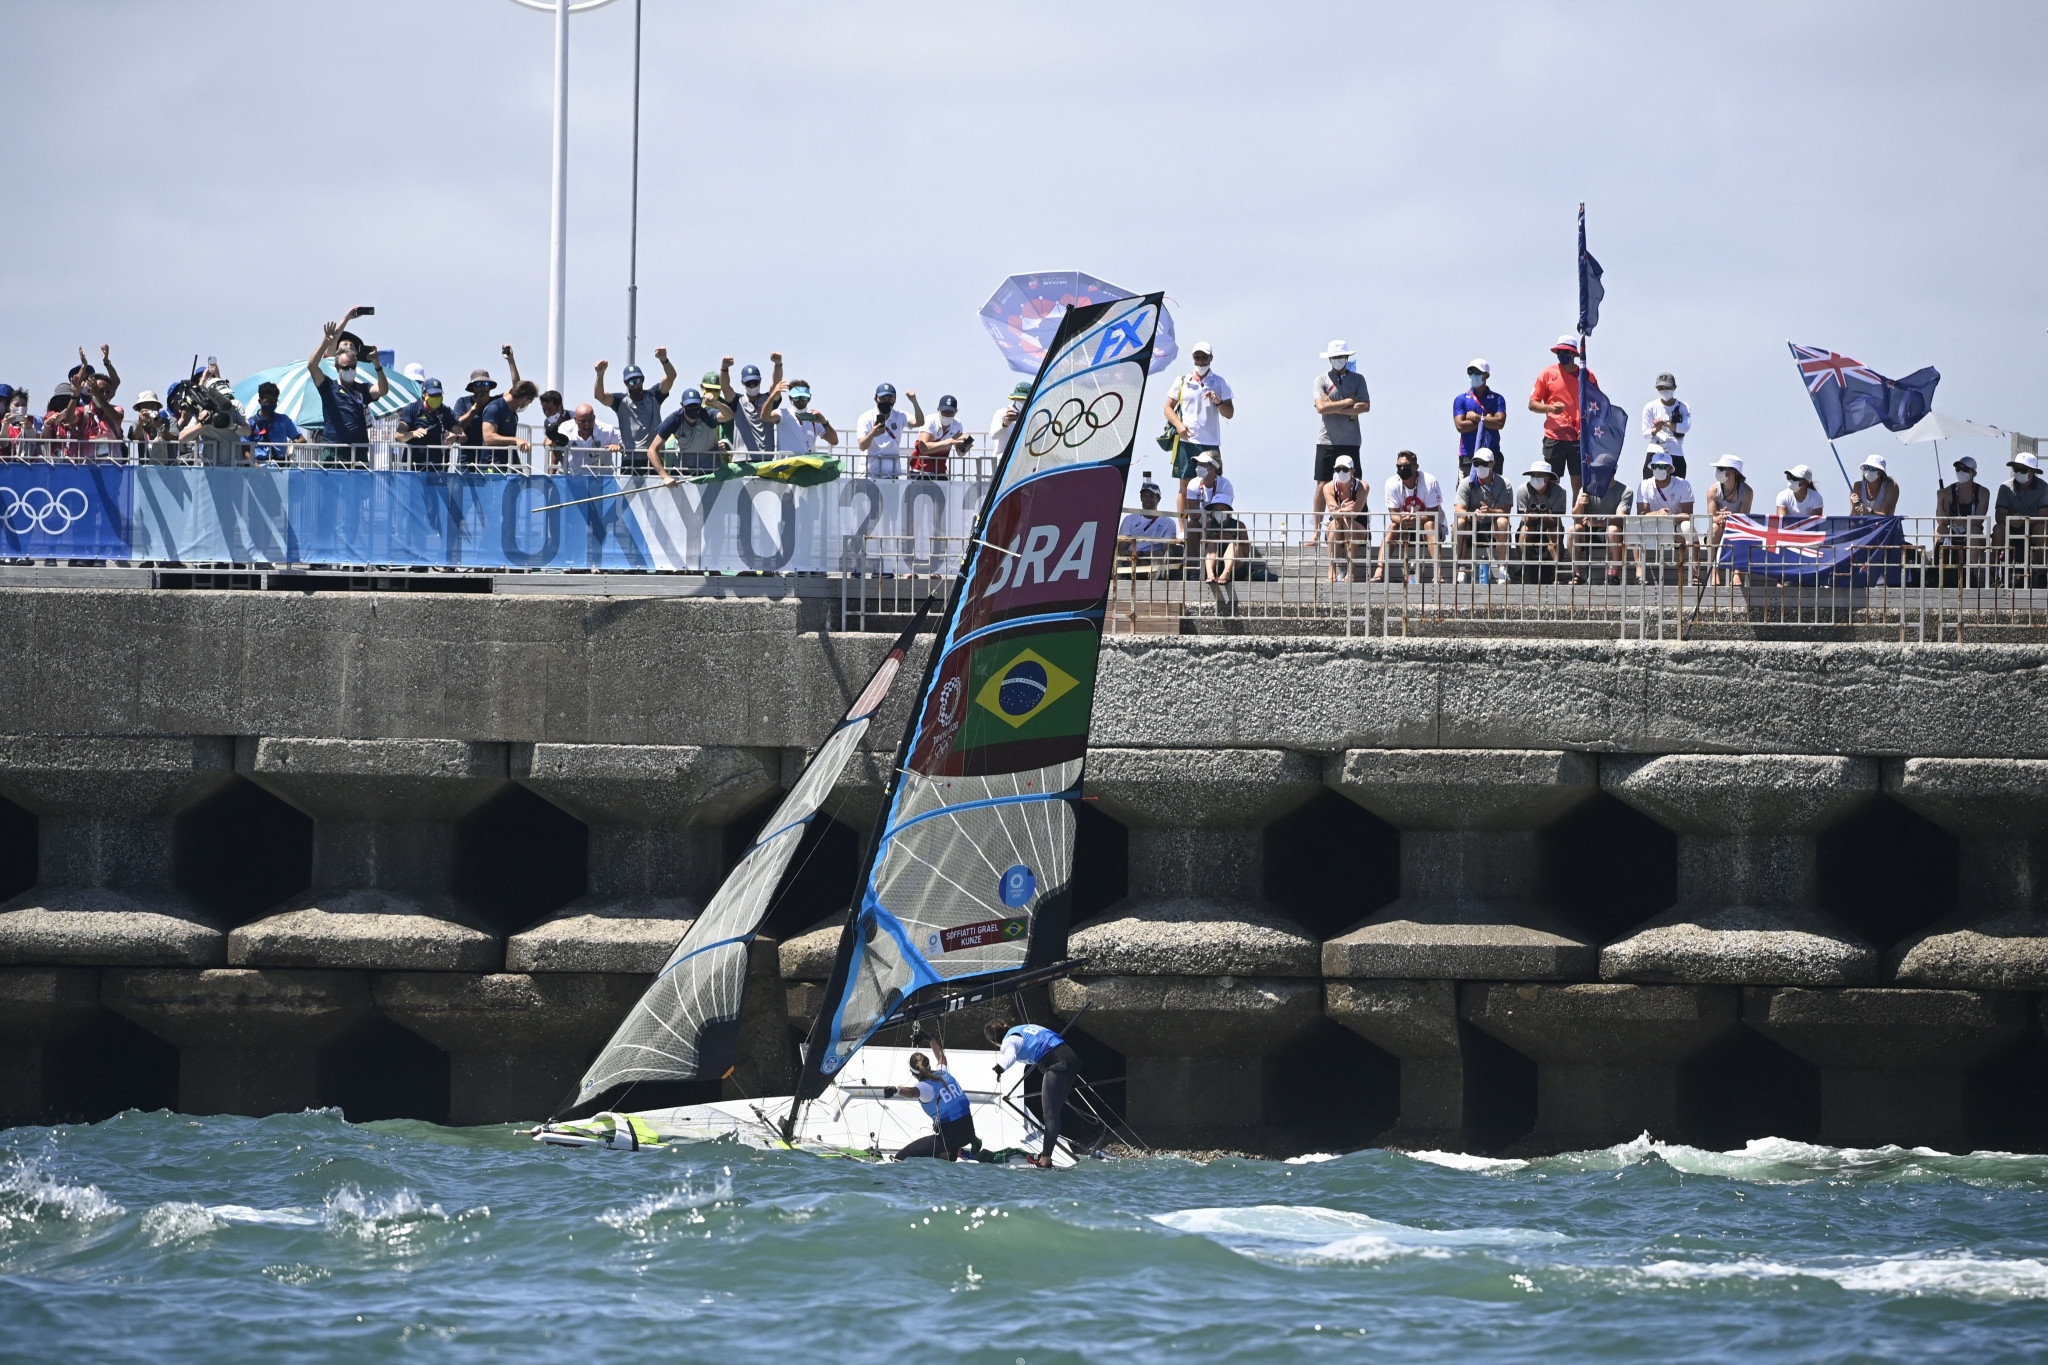 Brazil's double Olympic champions Martine Grael and Kahena Kunze won the 49erFX at last year's European Championships in Aarhus ©Getty Images